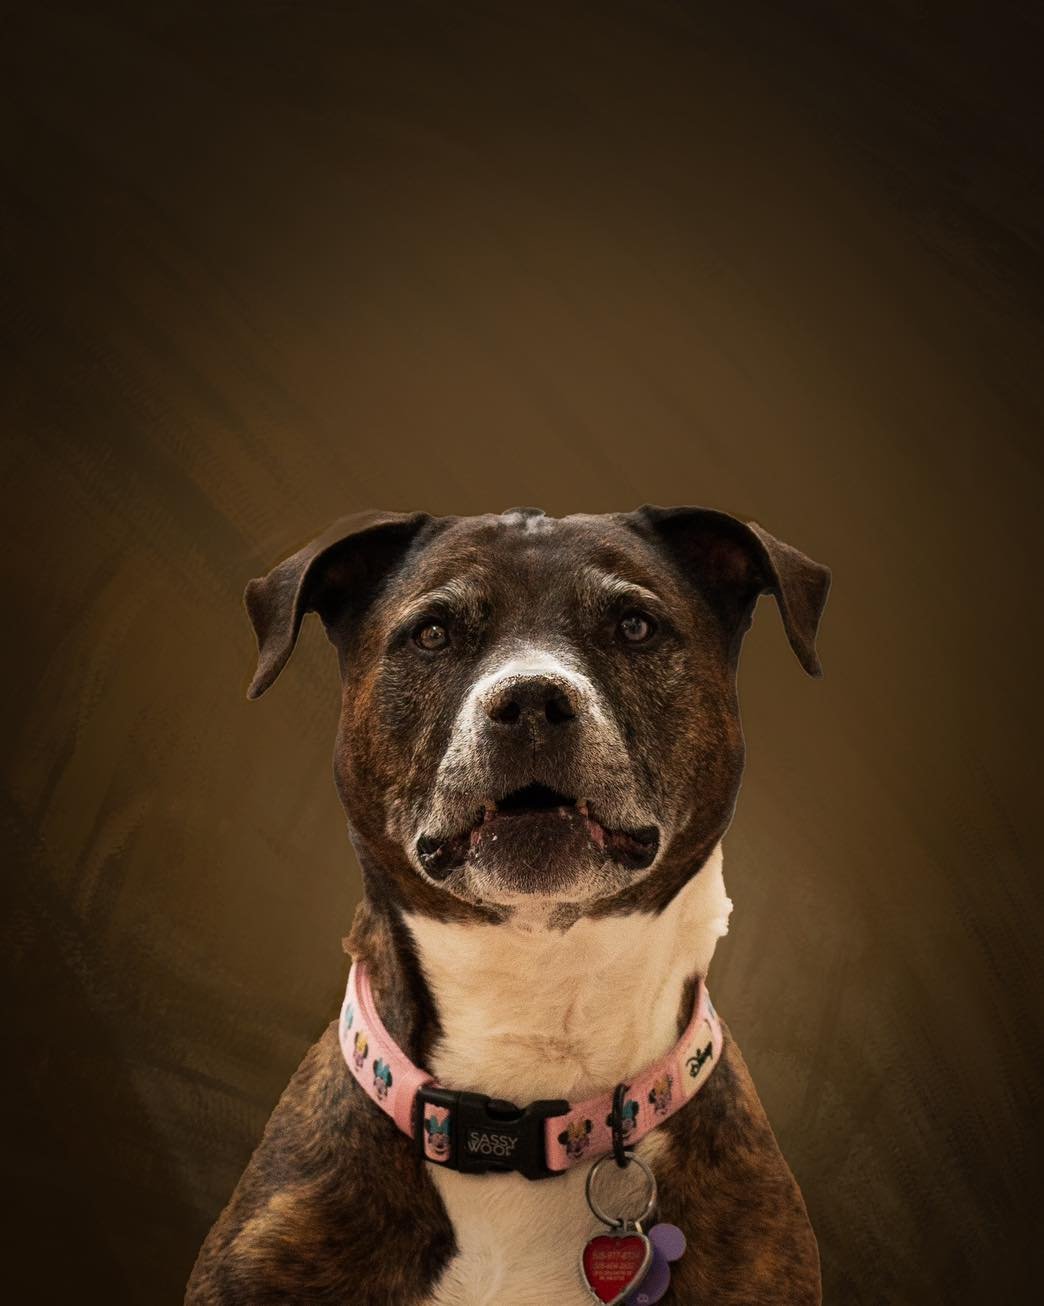 Sneak peek of a very good girl's in-home legacy portrait session!

Jewels was recently diagnosed with a very aggressive form of cancer called osteosarcoma. During her session, her mom and dad told me all about how they adopted her when they first met